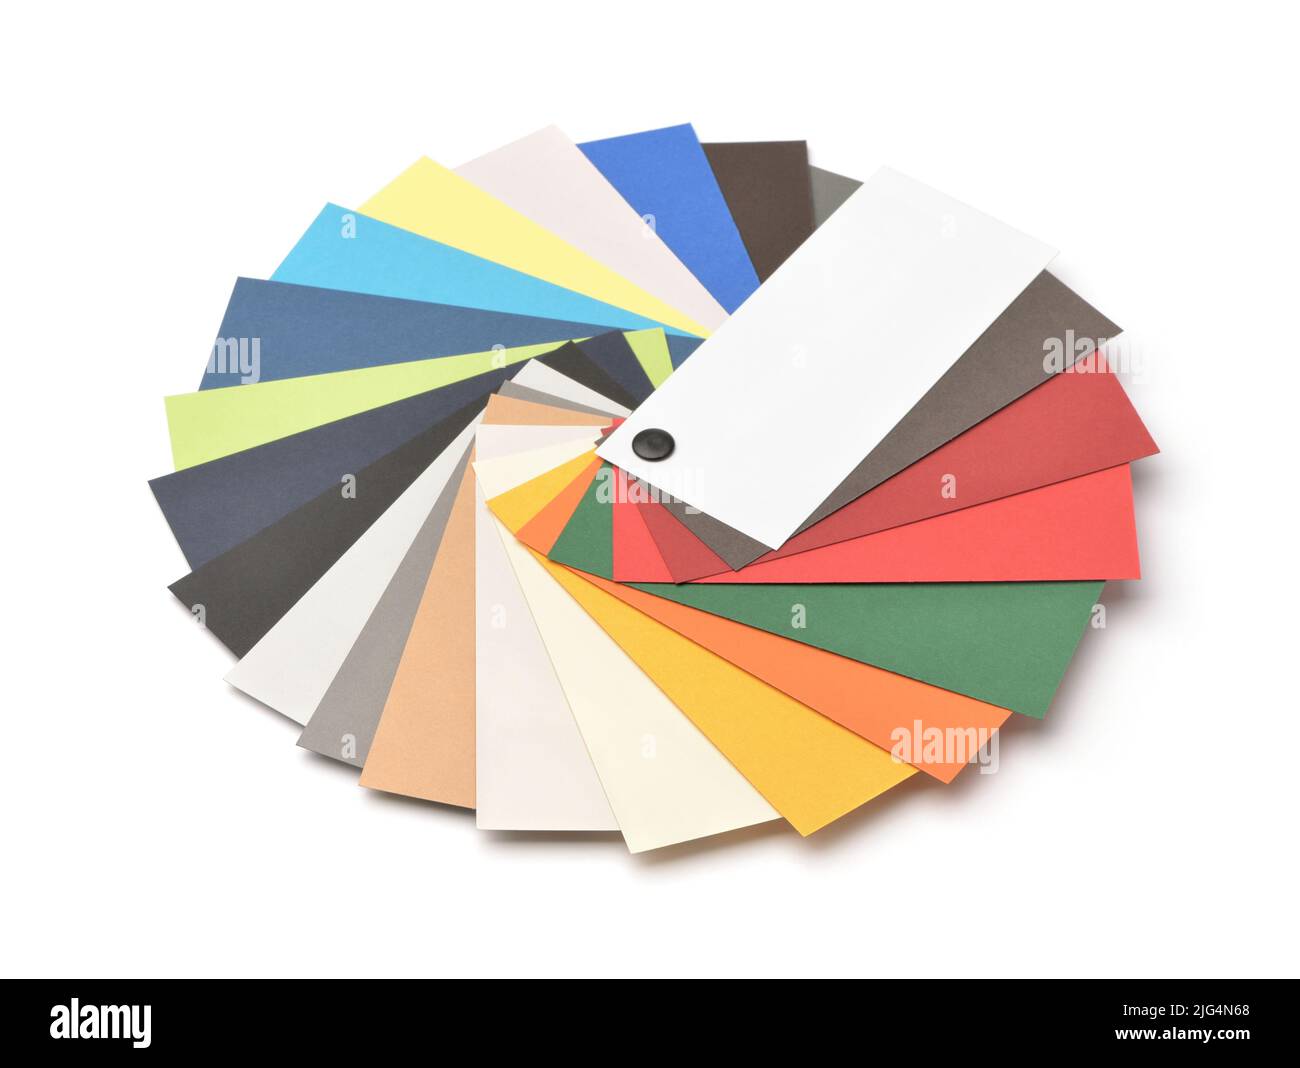 Fan of cardstock paper samples isolated on white Stock Photo